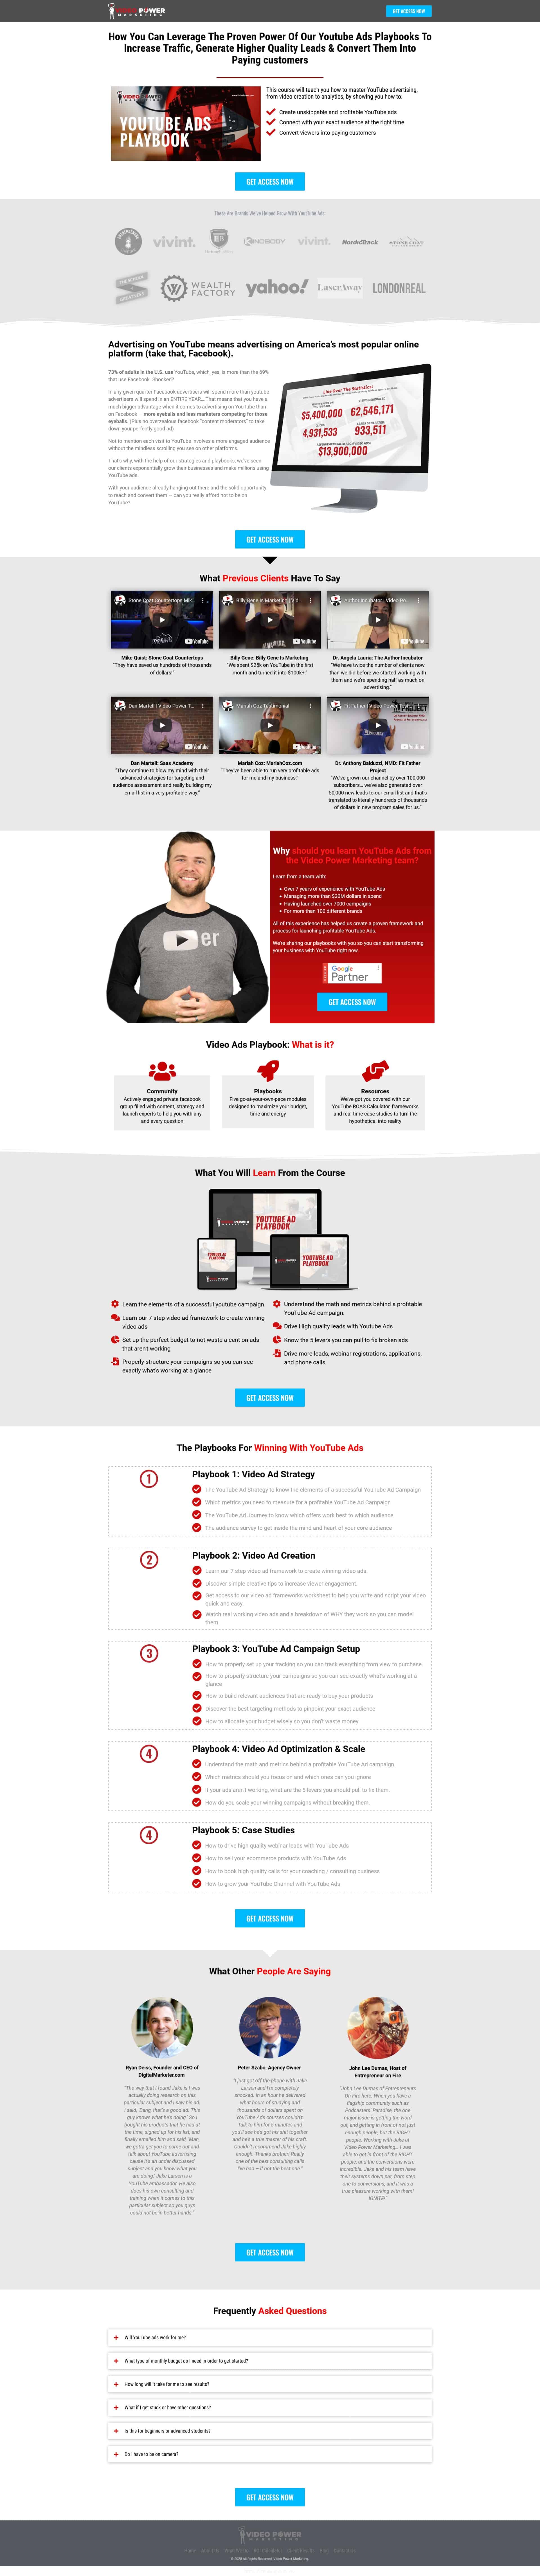 YouTube Ads PlayBook by Jake Larsen Sales Page